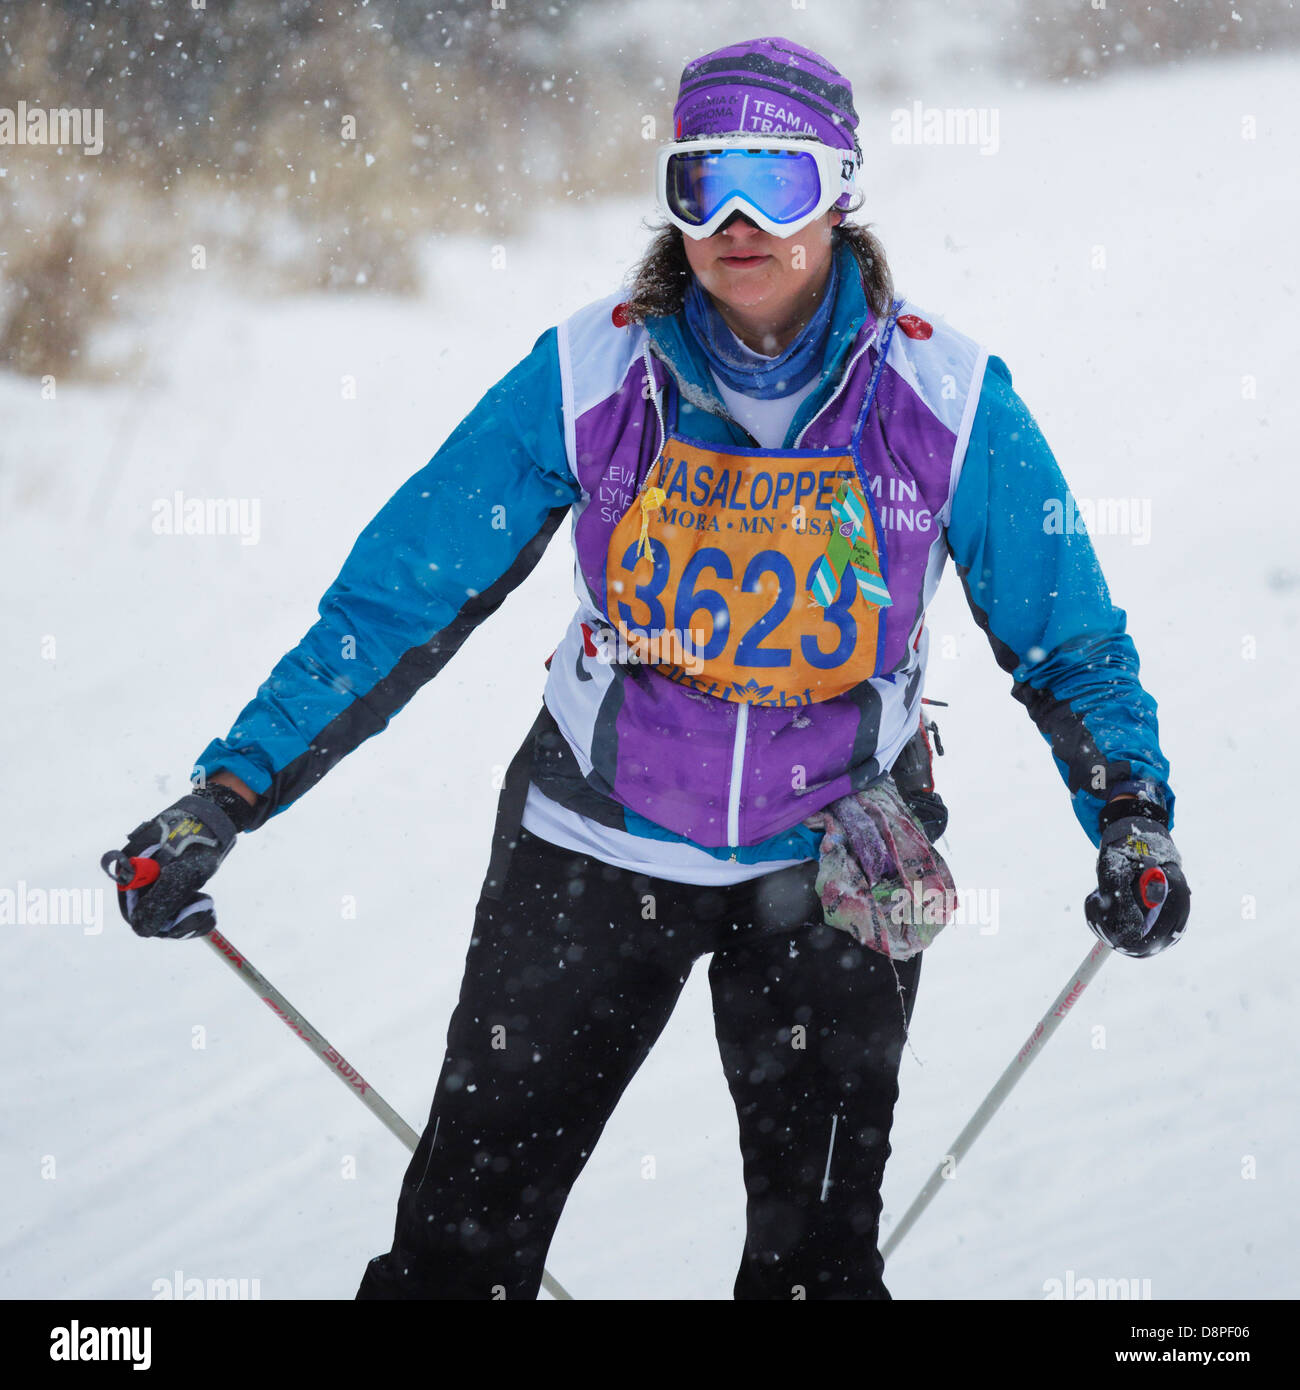 A woman competes in the Mora Vasaloppet ski race on February 10, 2013 in Mora, Minnesota. Stock Photo